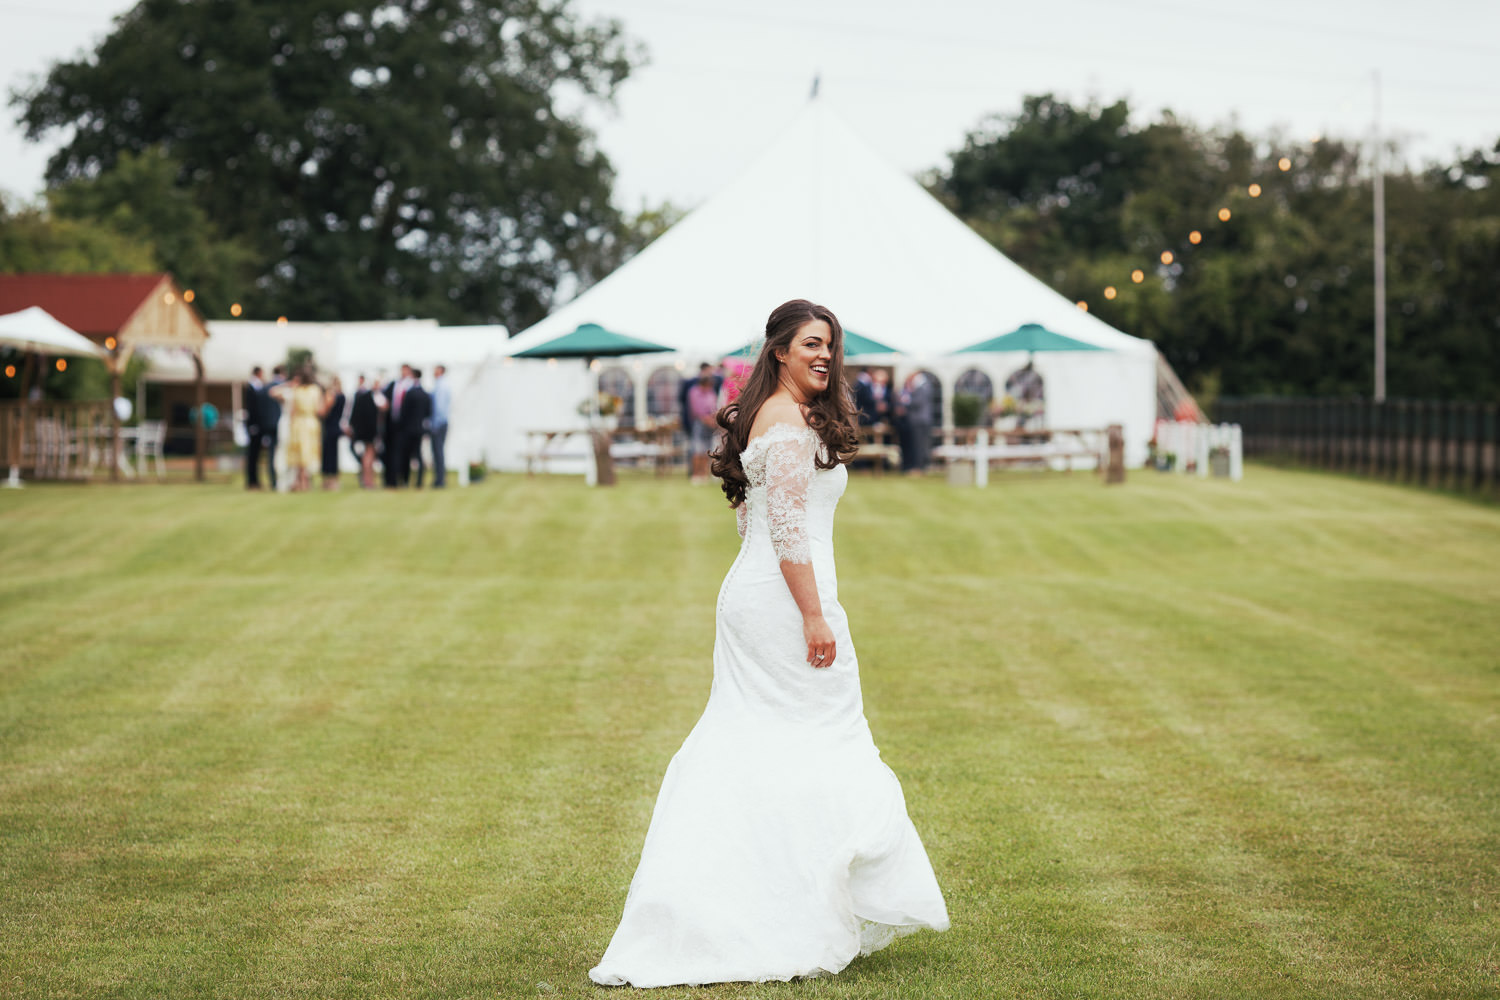 Essex wedding photography testimonial picture. The bride is in a field looking back at the camera and smiling. A wedding marquee is in the distance.